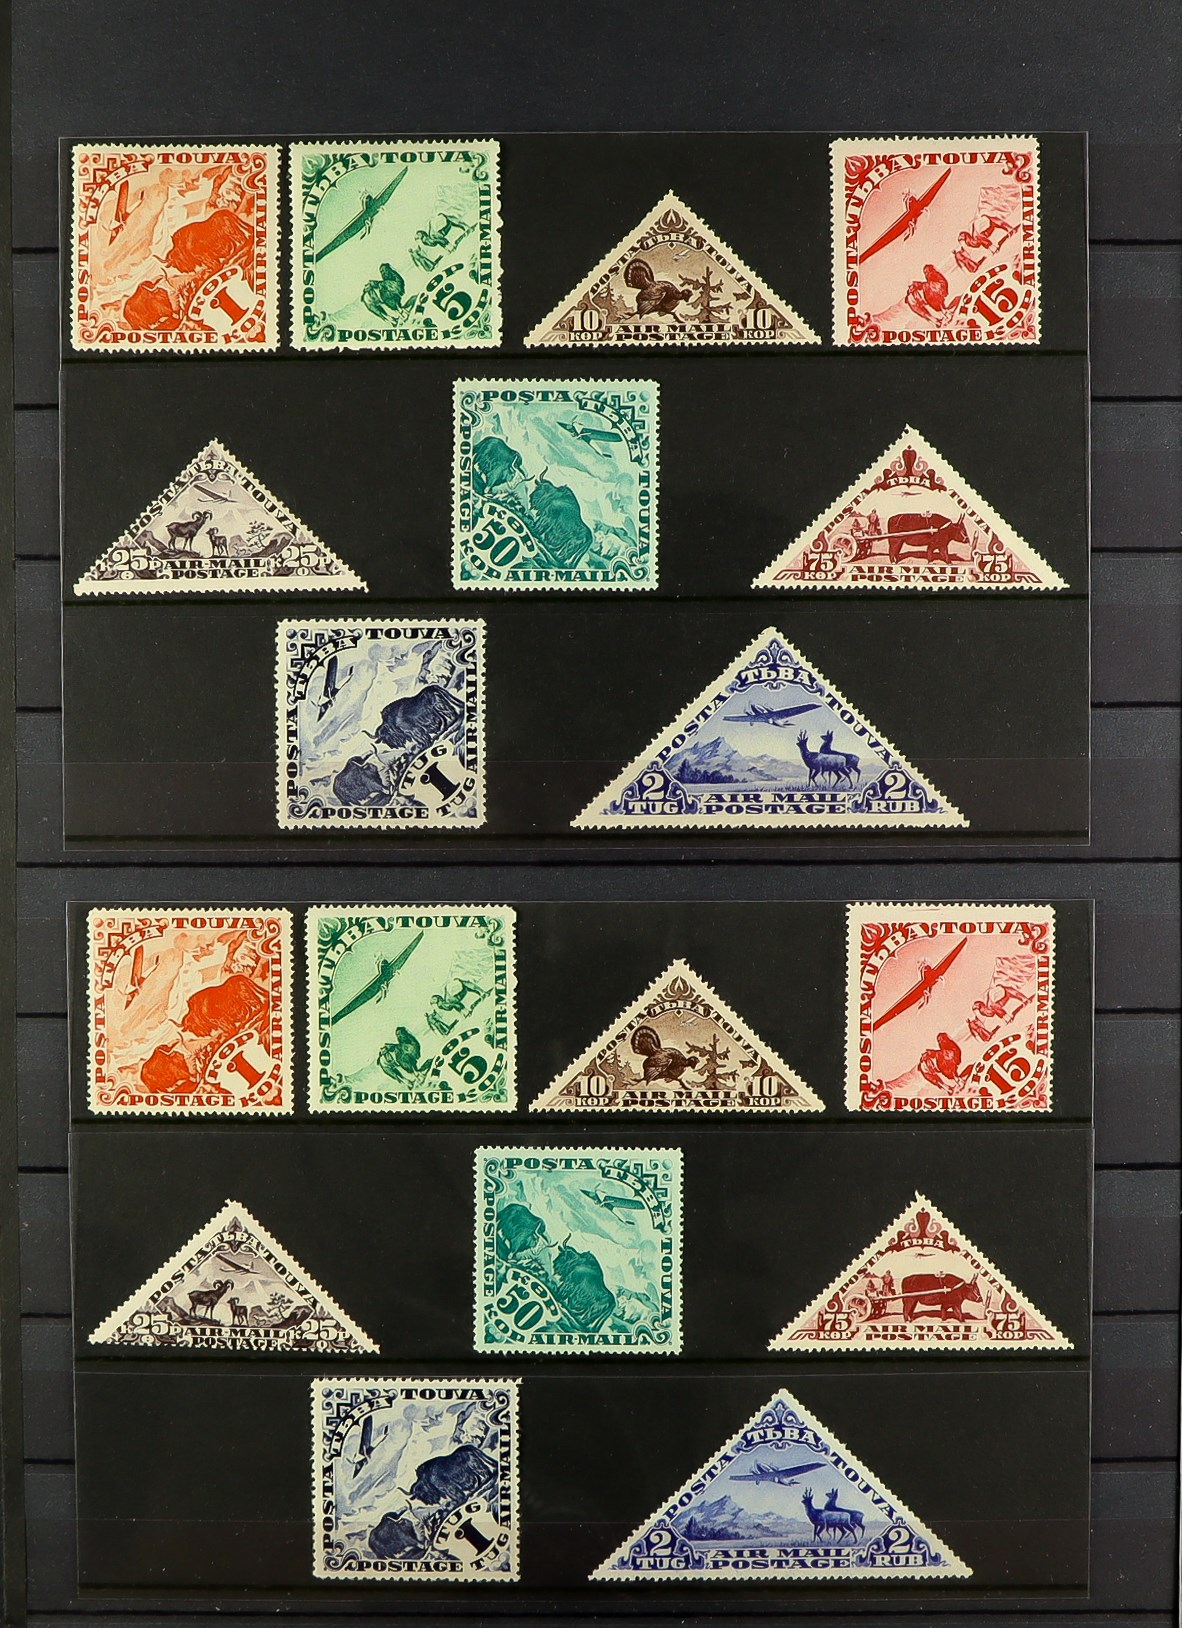 TUVA 1926 - 1995 DEALERS STOCK on various protective pages, with over 1500 mint / never hinged - Image 5 of 14